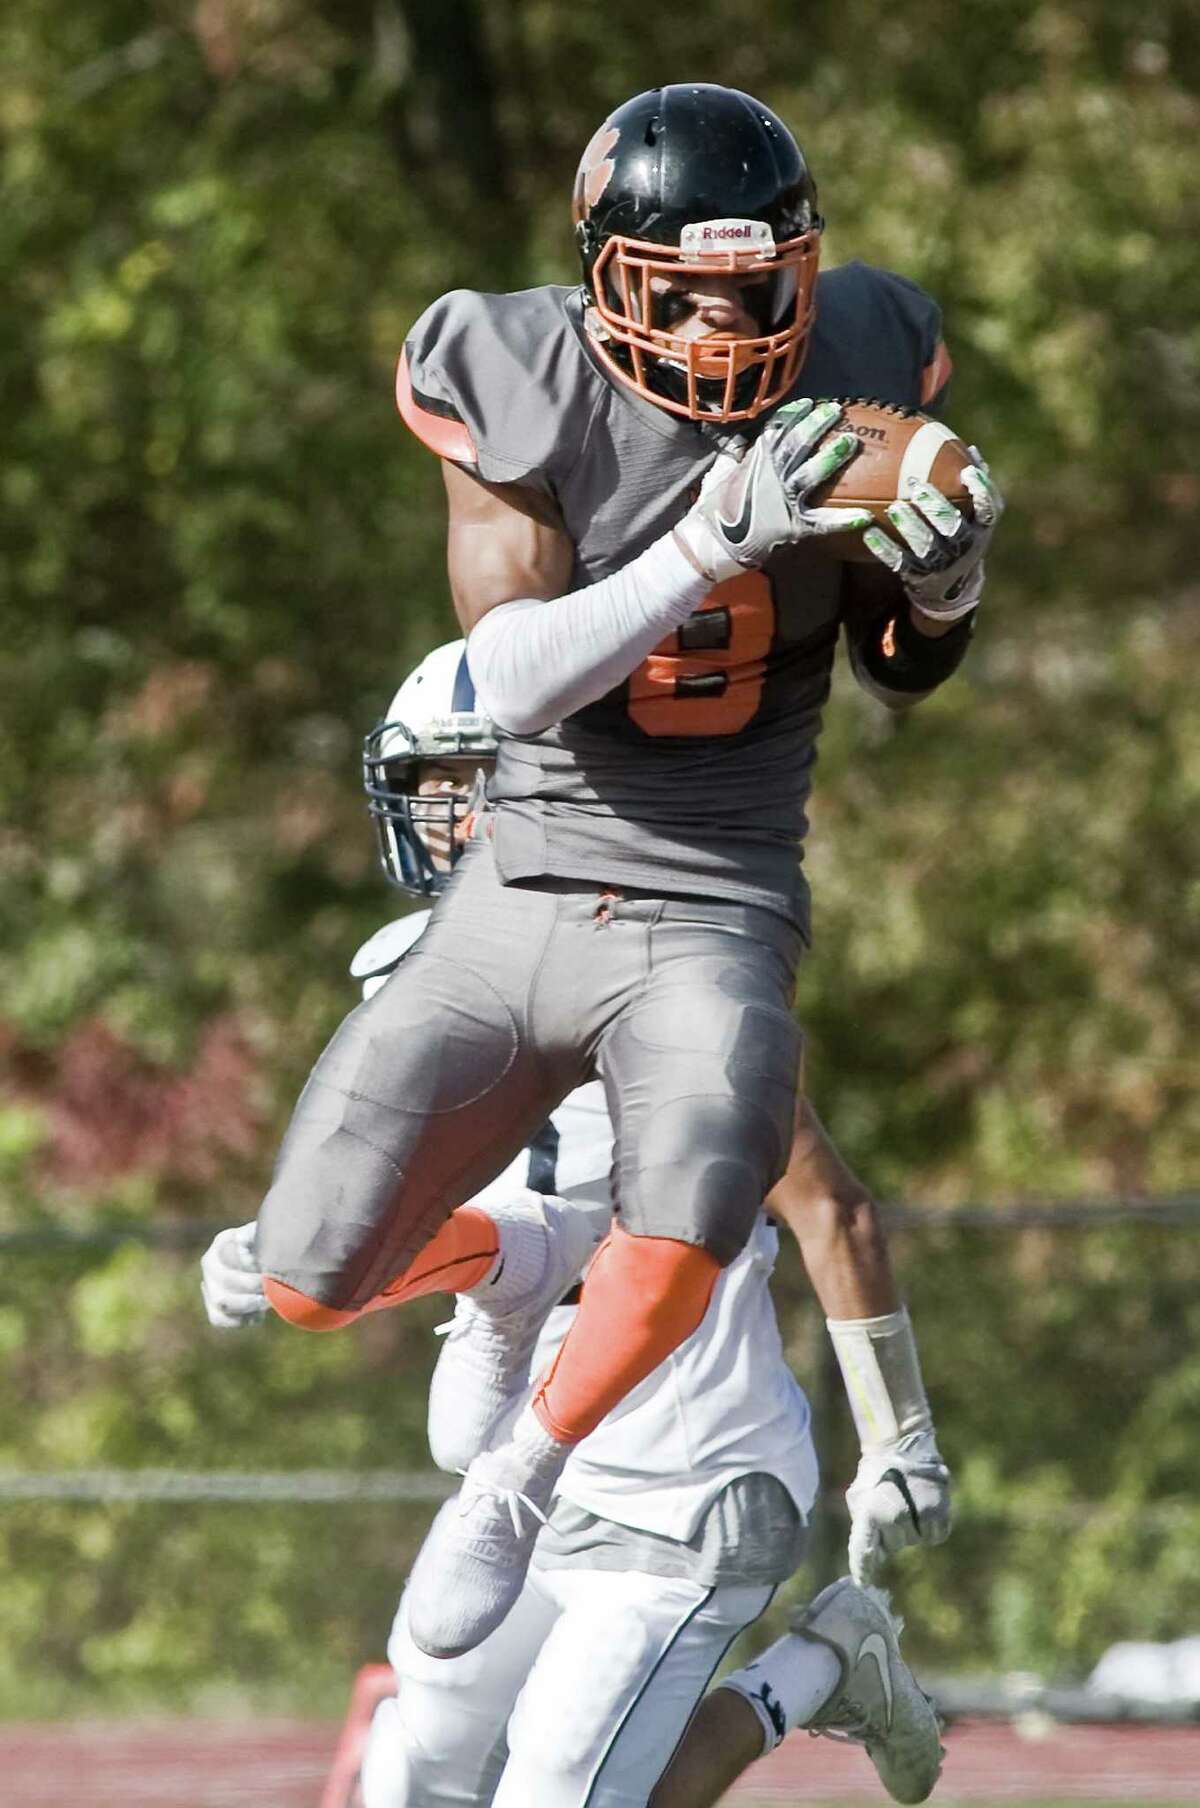 Ridgefield receiver Jackson Mitchell has a team-high 53 receptions for 742 yards and nine touchdowns.